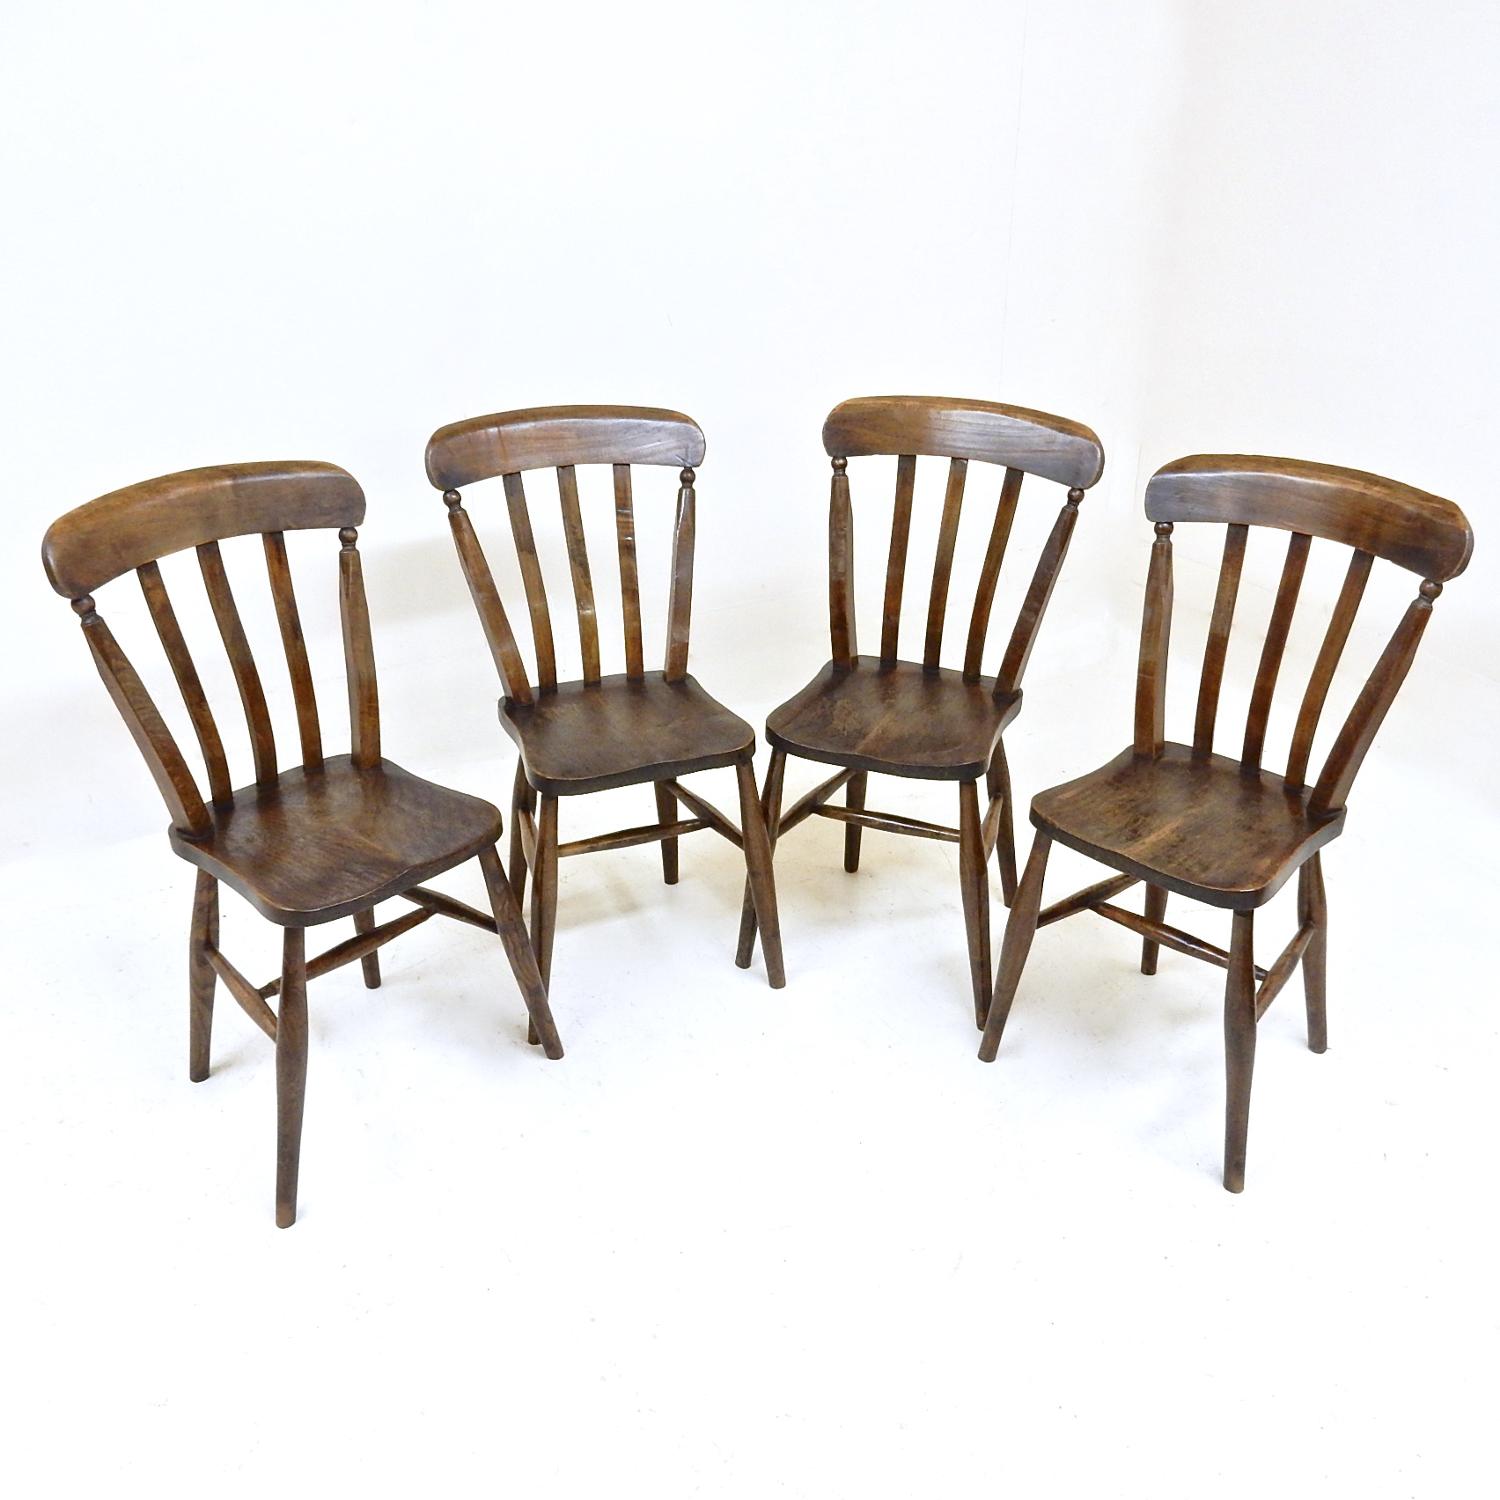 Vintage Country Kitchen Chairs